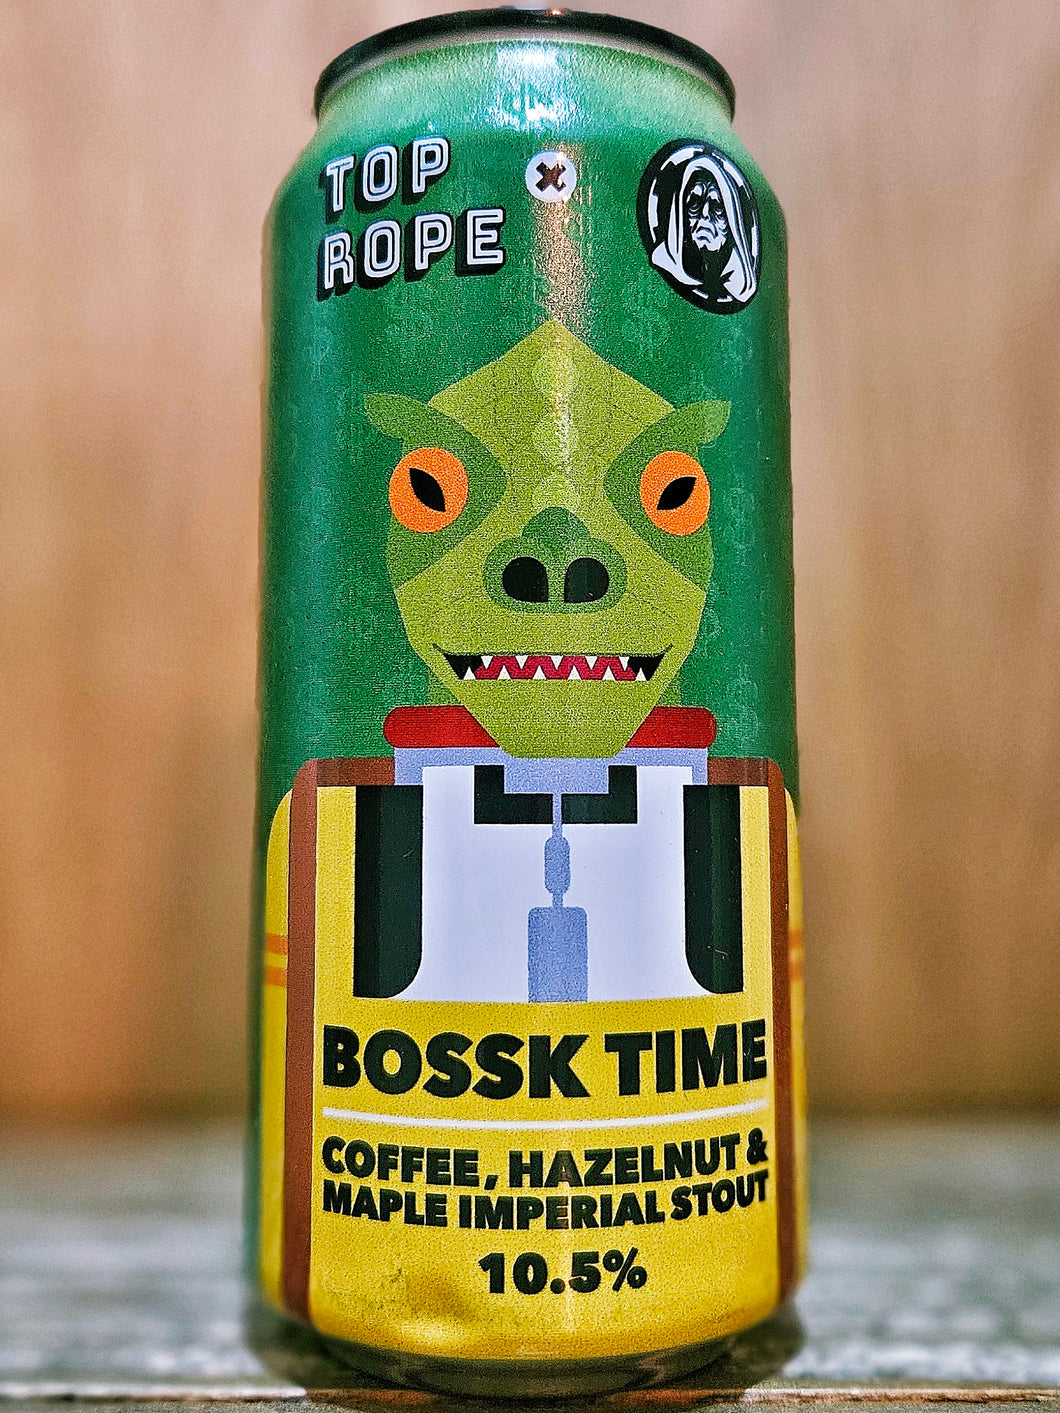 Top Rope v Emperor's Brewery - Bossk Time